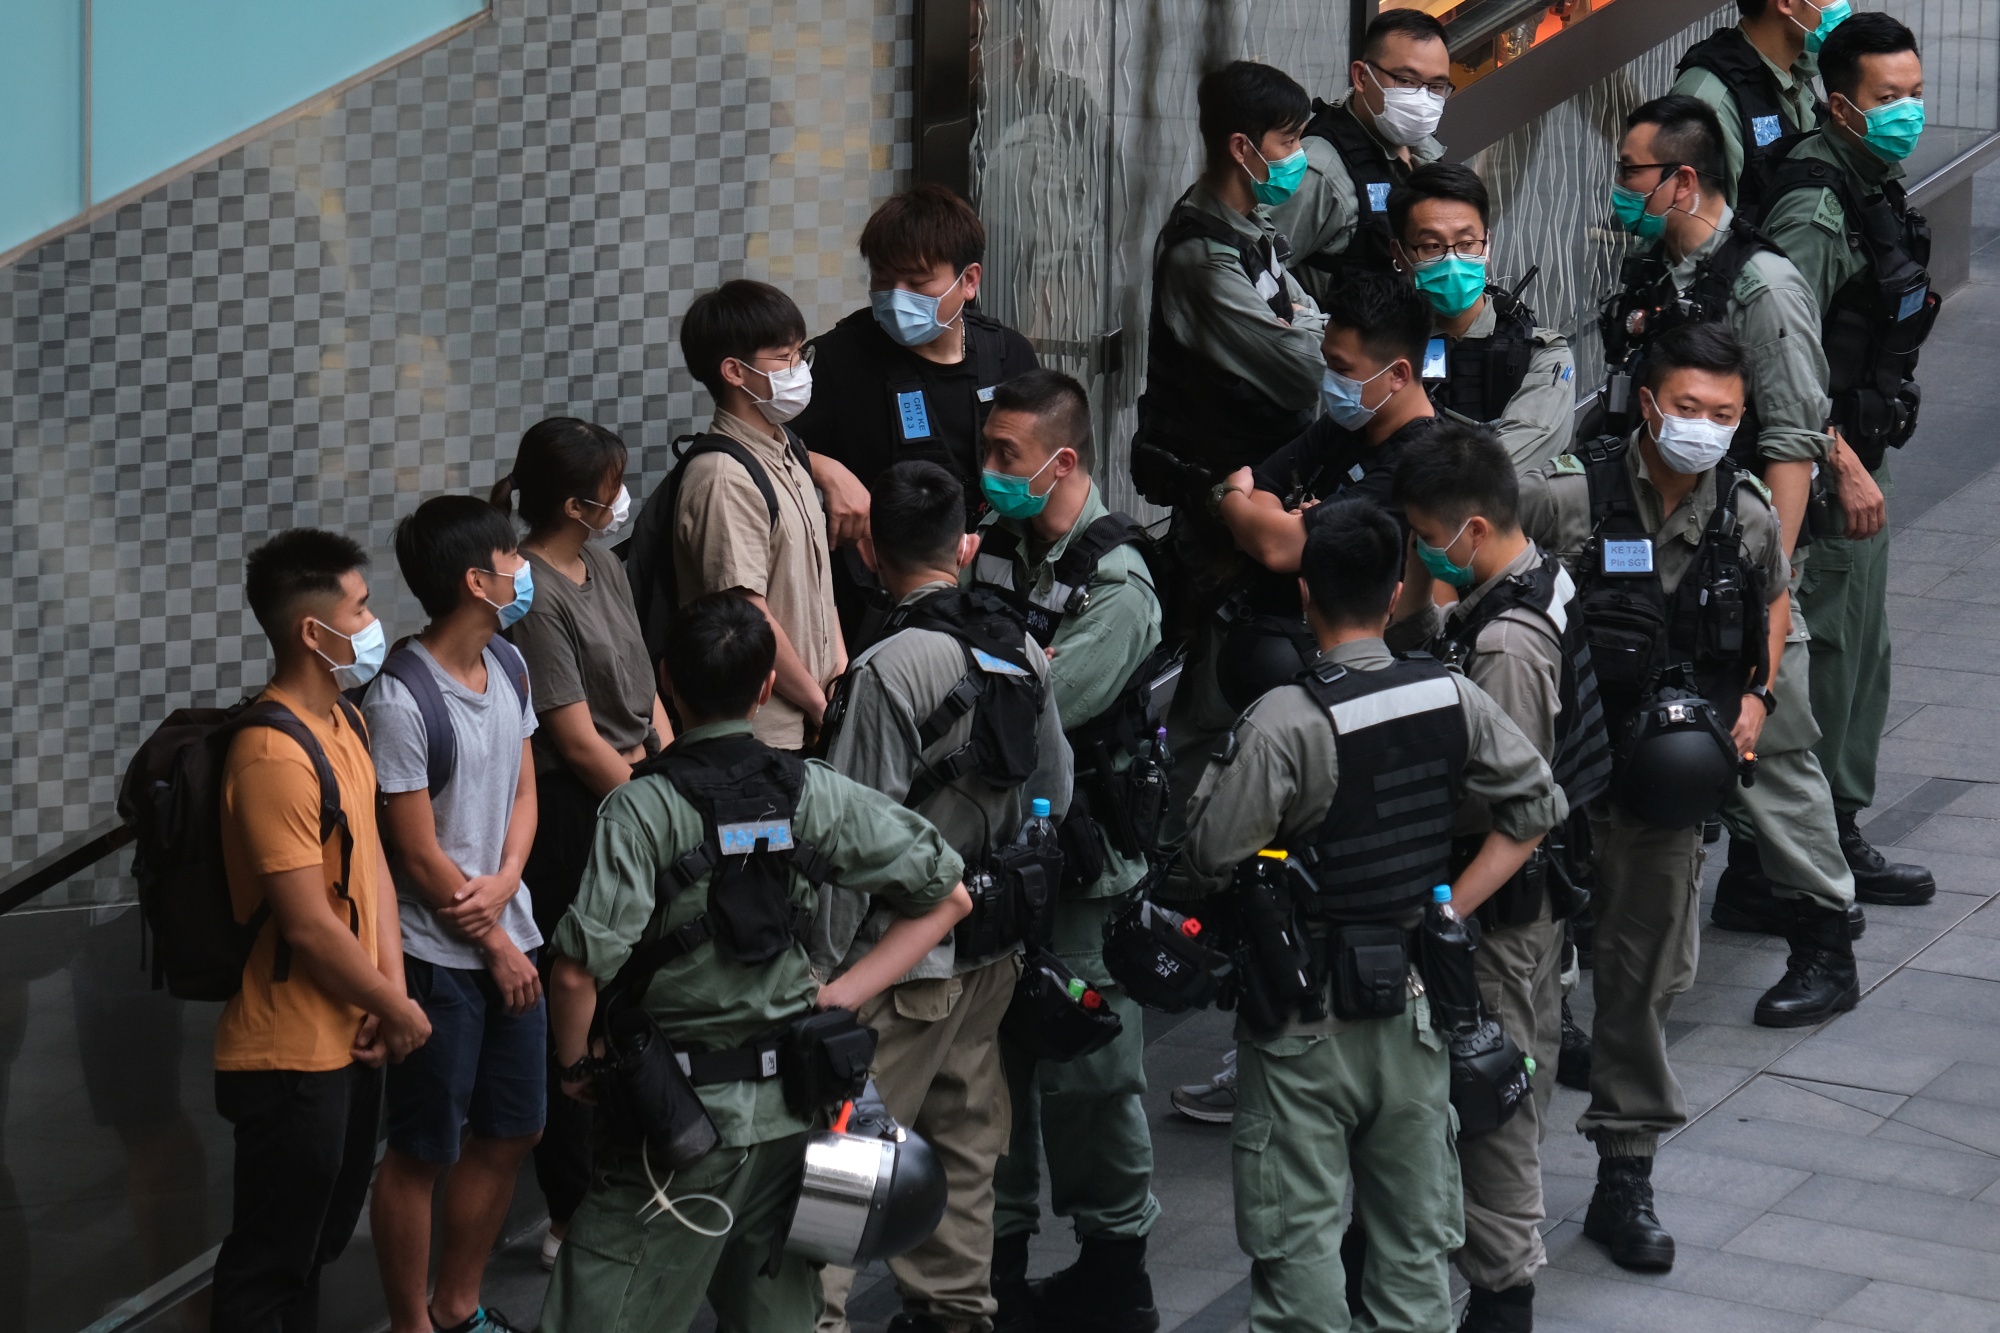 Riot police stop and search people in front of a Louis Vuitton luxury goods store,&nbsp;ahead of an anticipated protest in Hong Kong, on May 27.